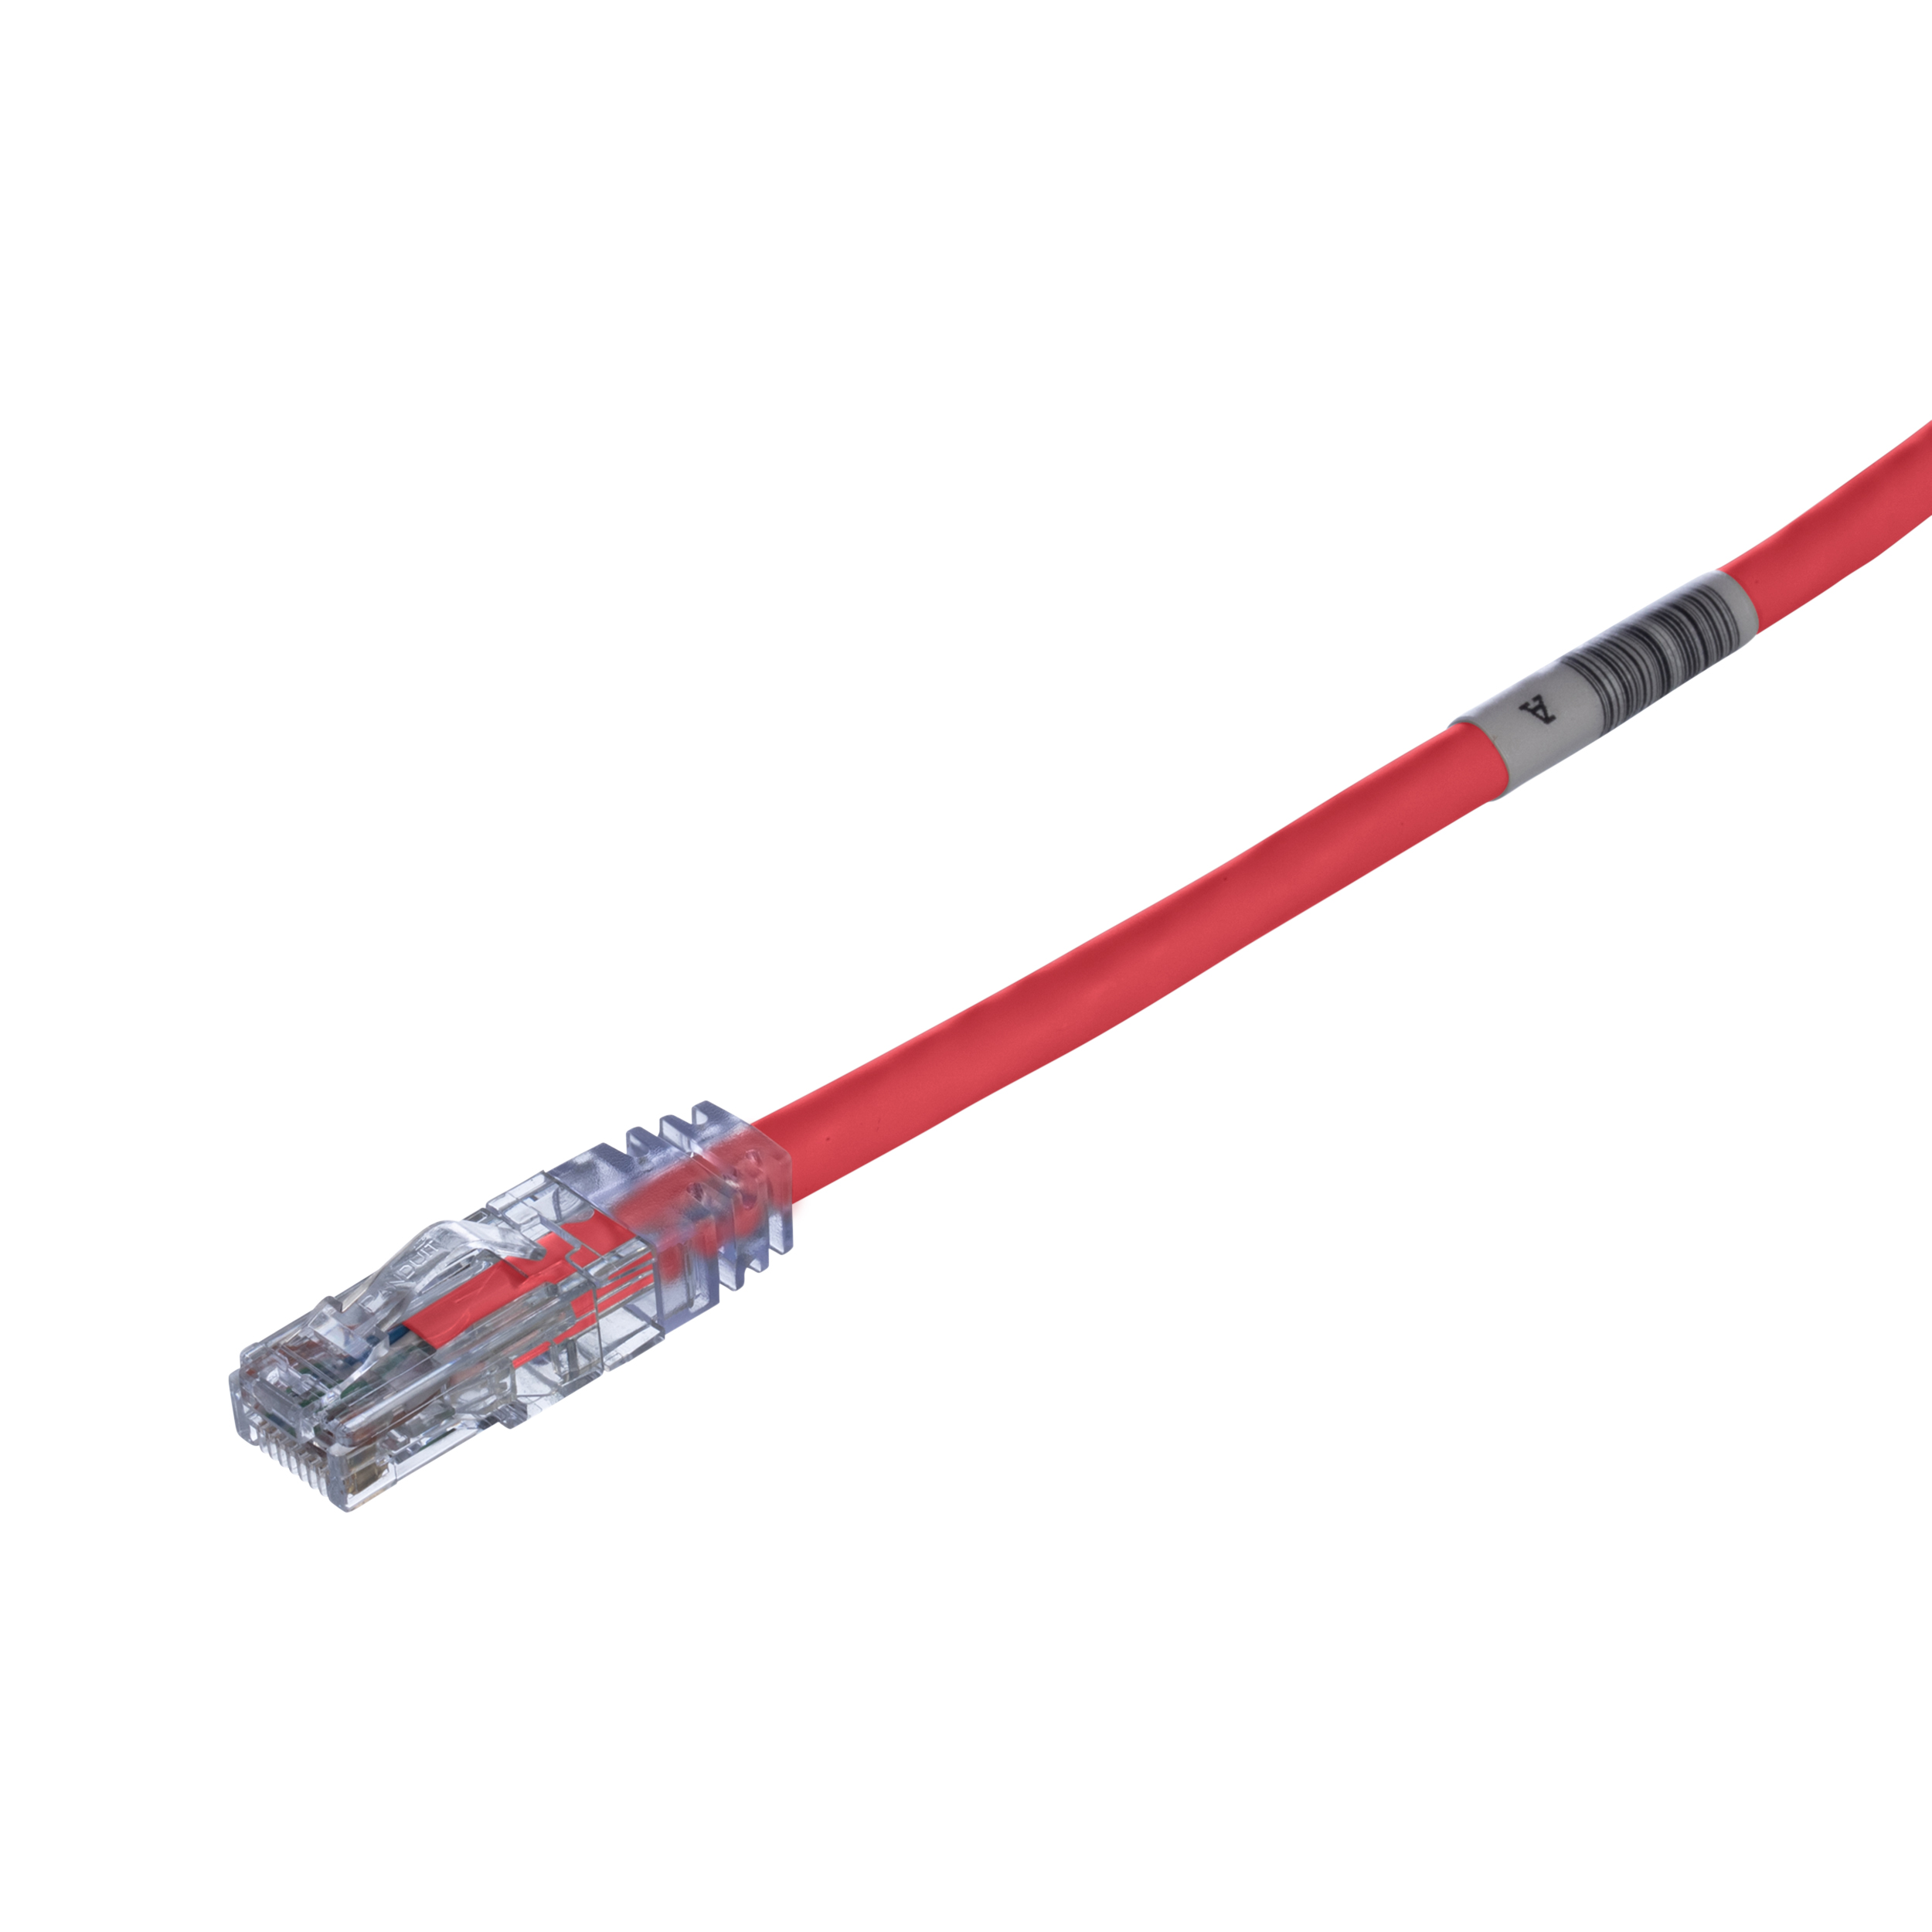 Cat 6 24 AWG UTP Copper Patch Cord, 5 m, Red